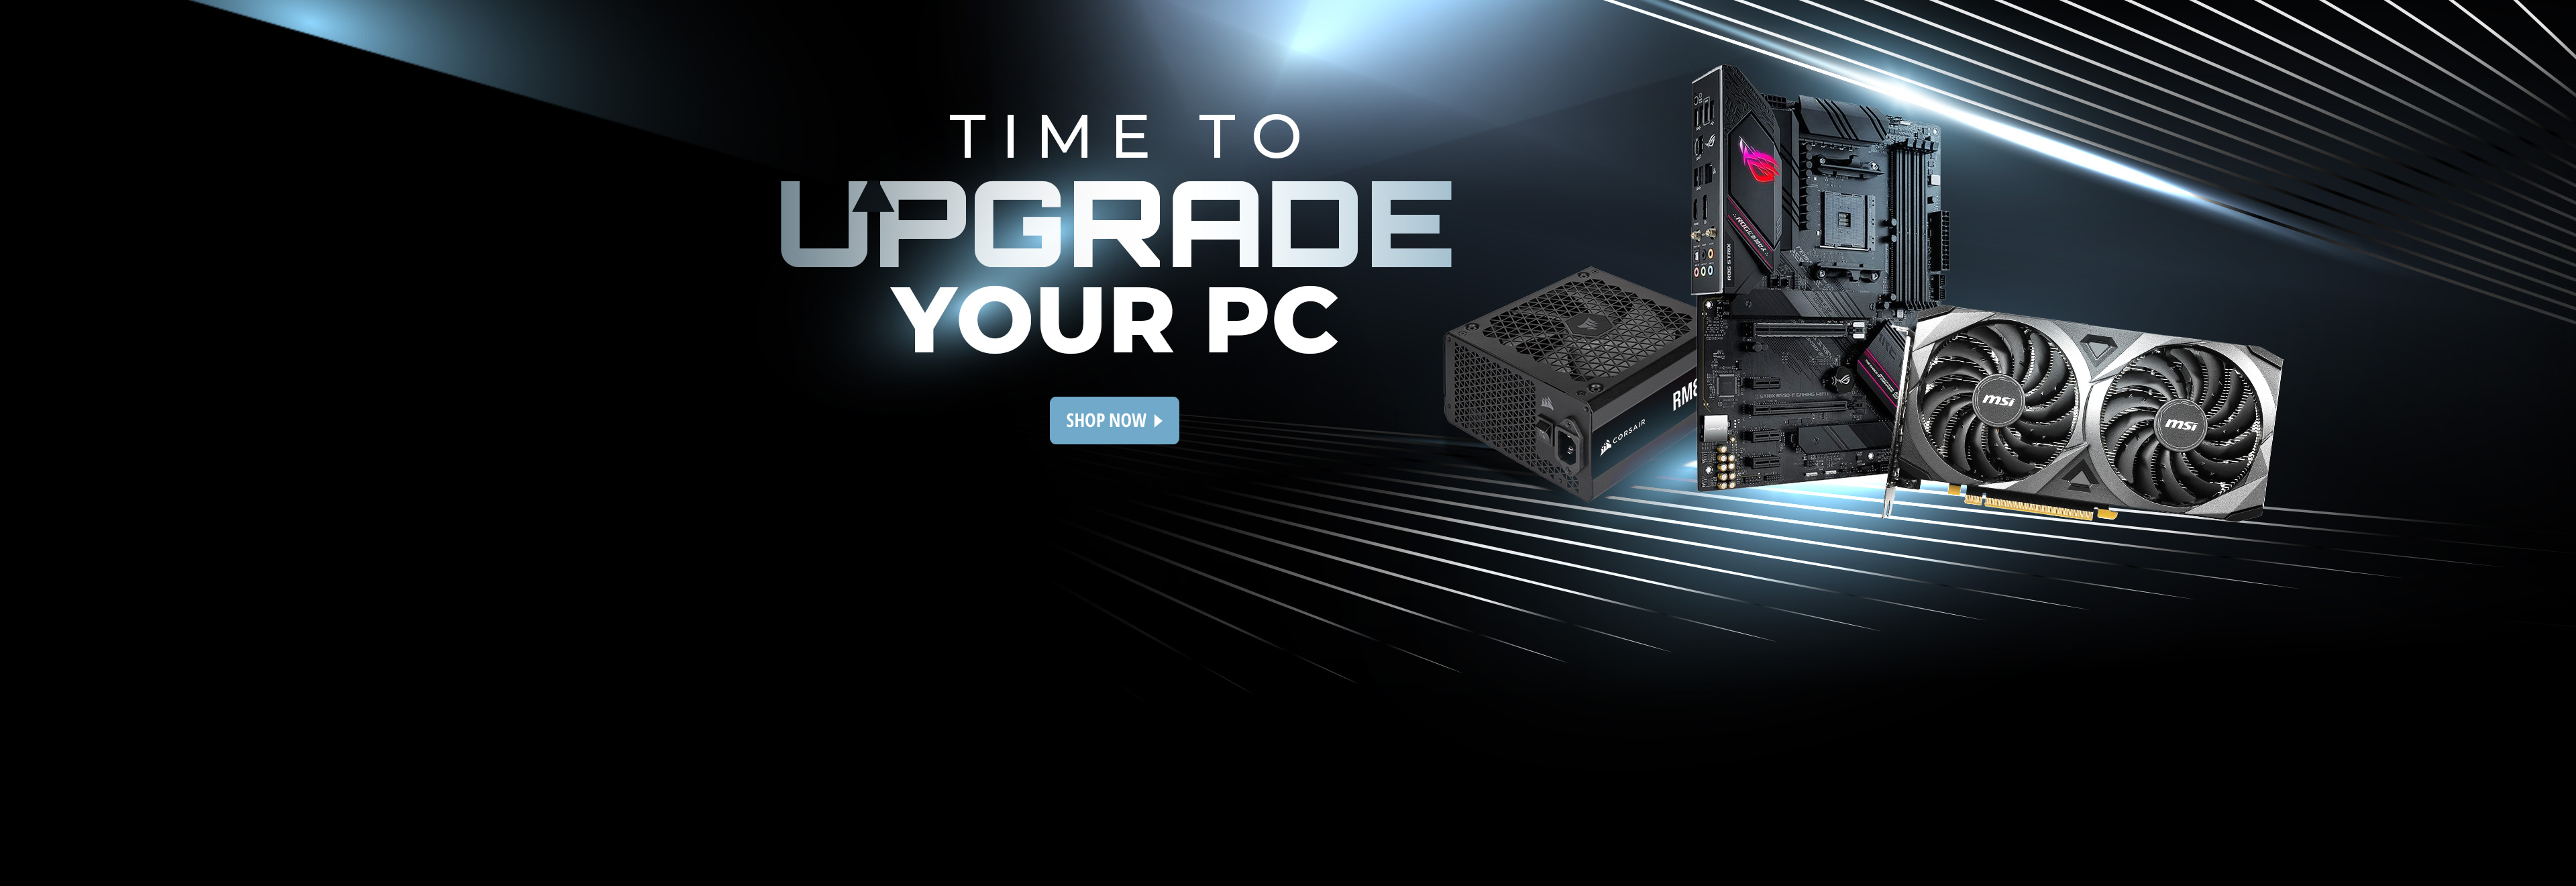 Time to Upgrade Your PC